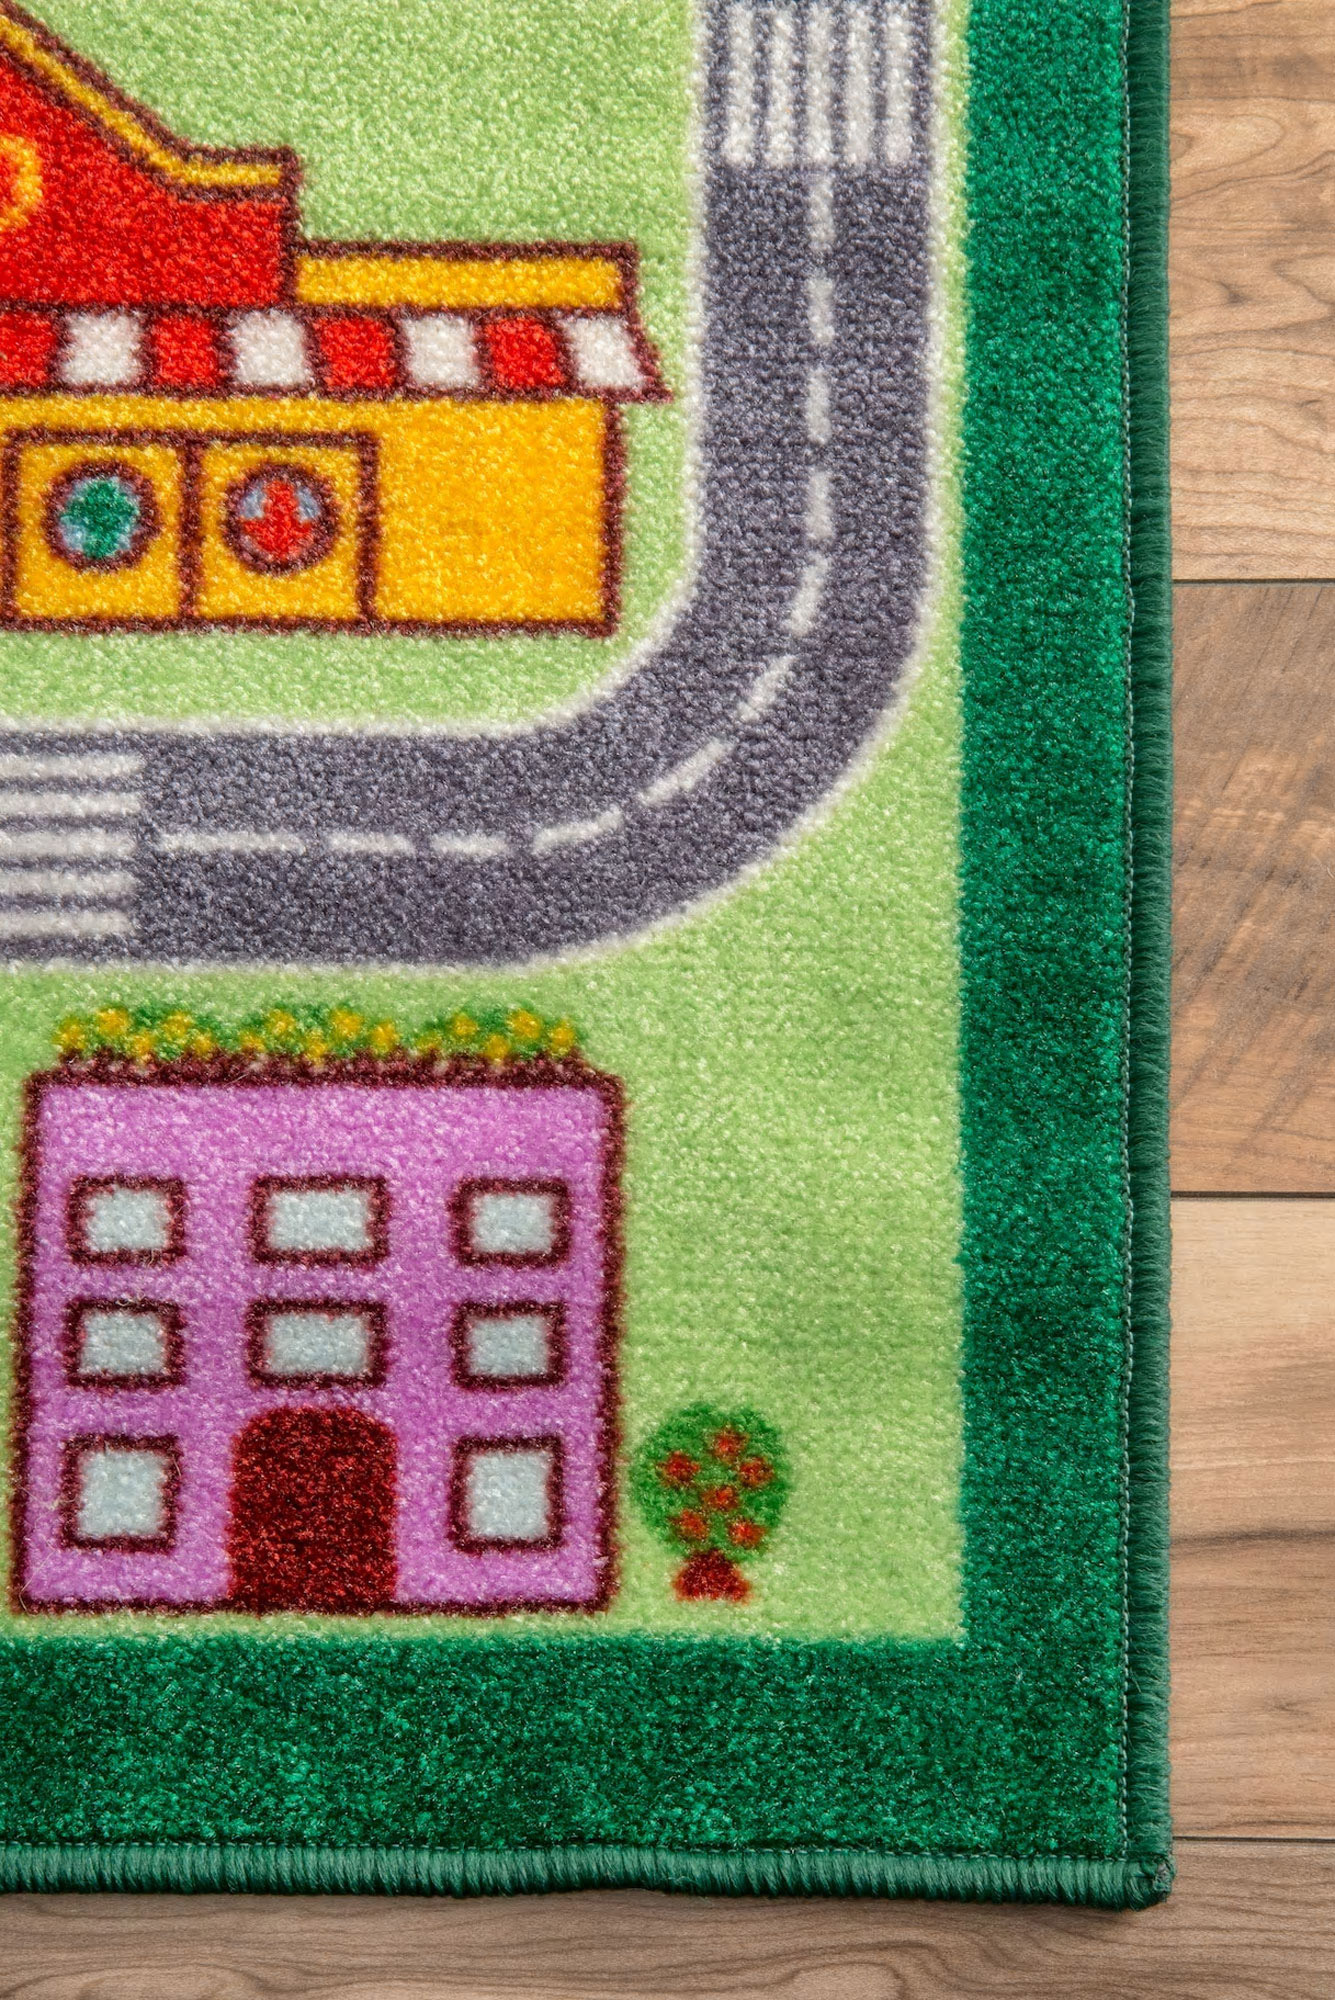 Kids Country Town Car Road Rug